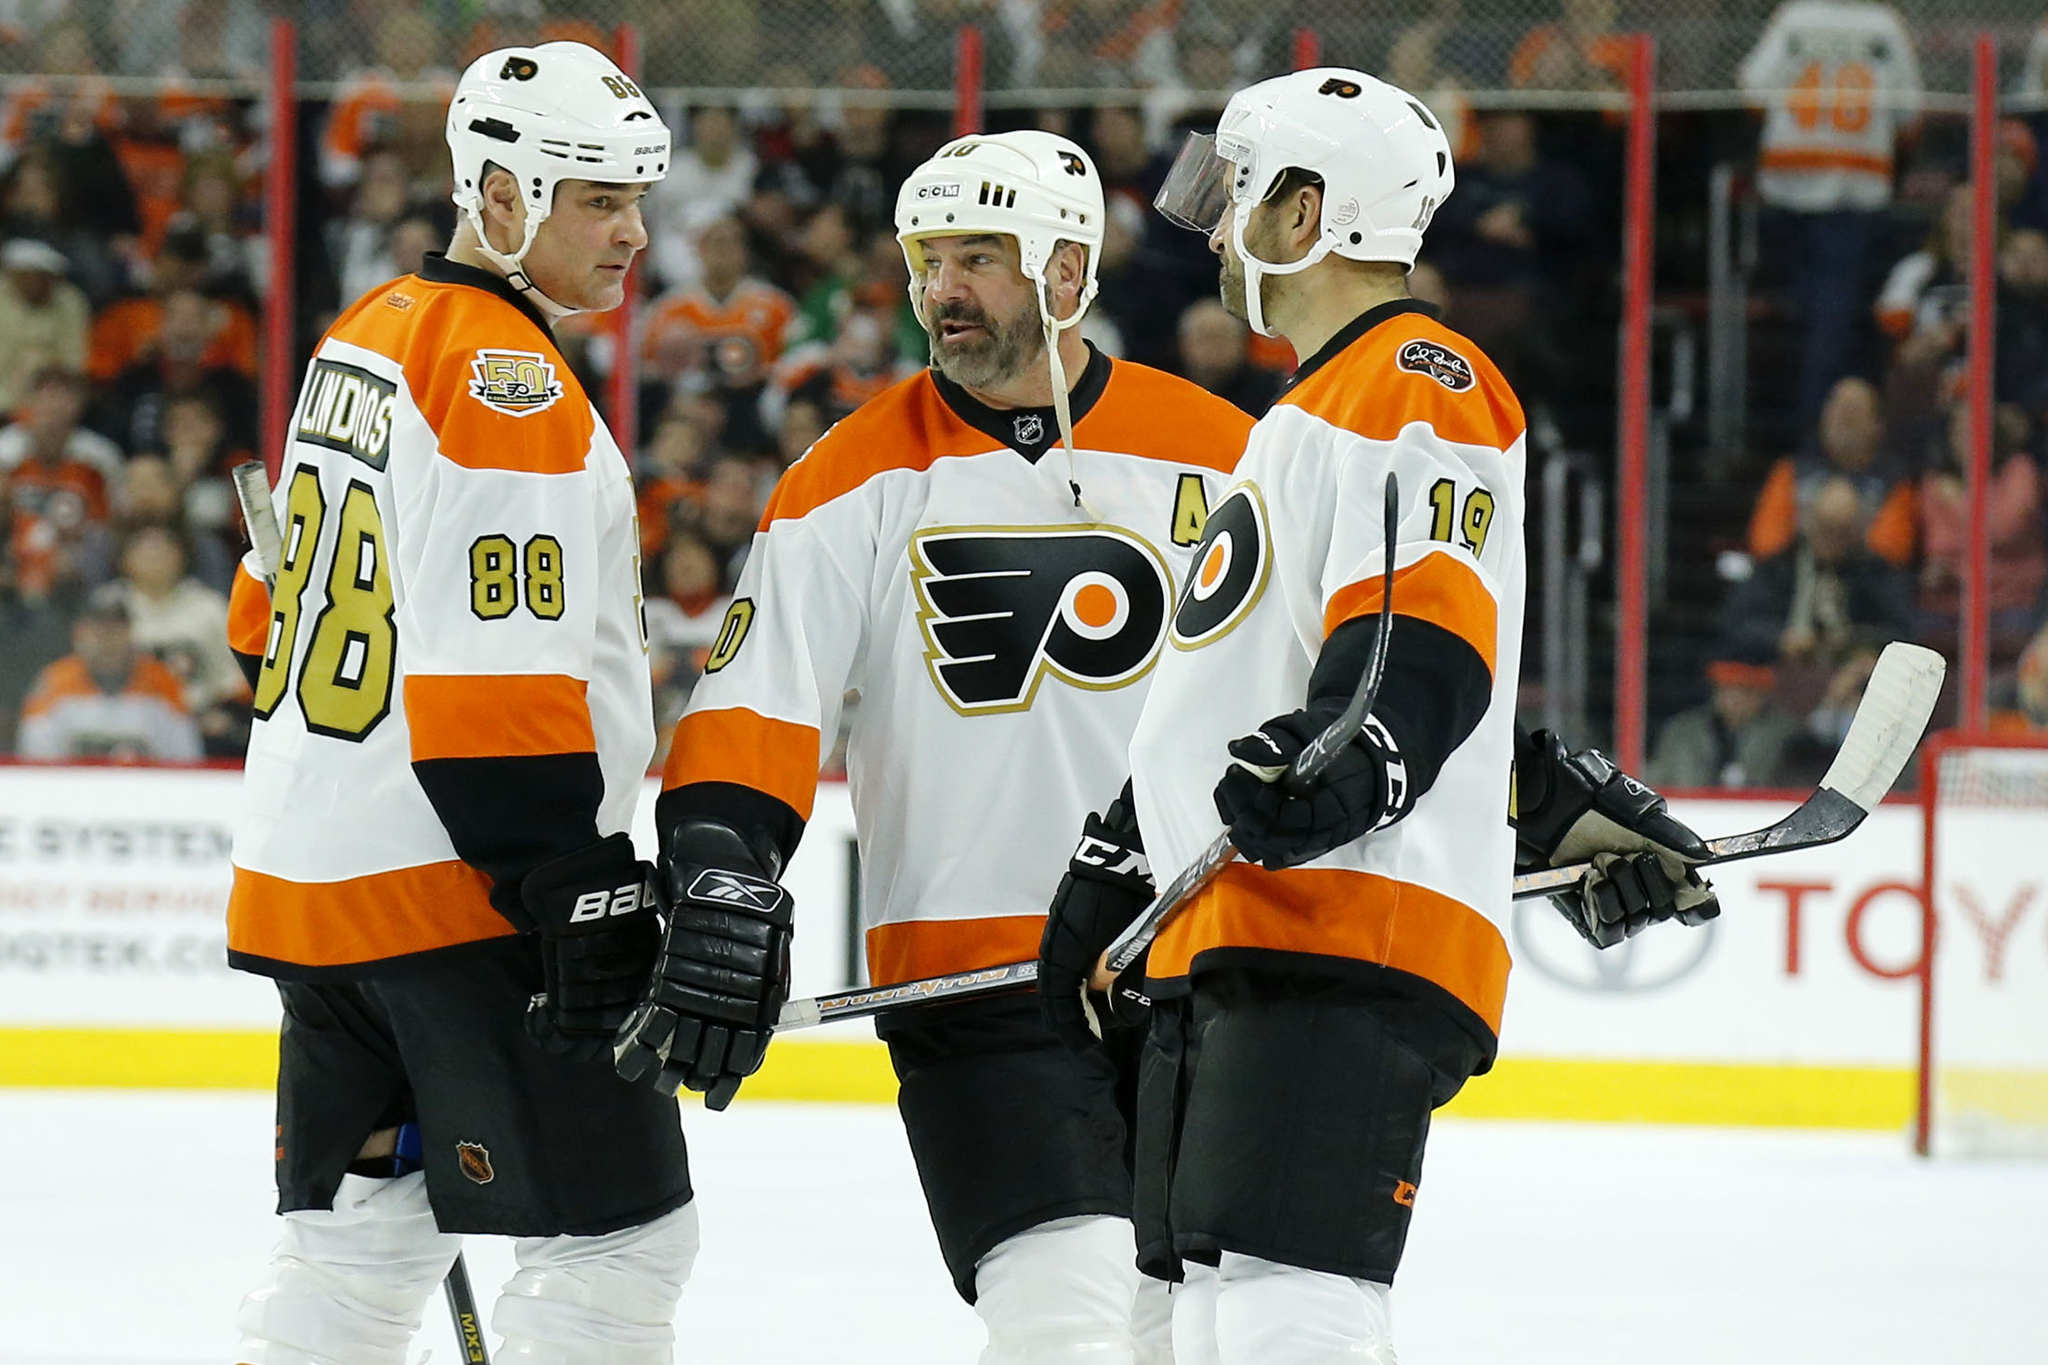 Flyers alumni games don't get old for Joe Watson: 'I love to play